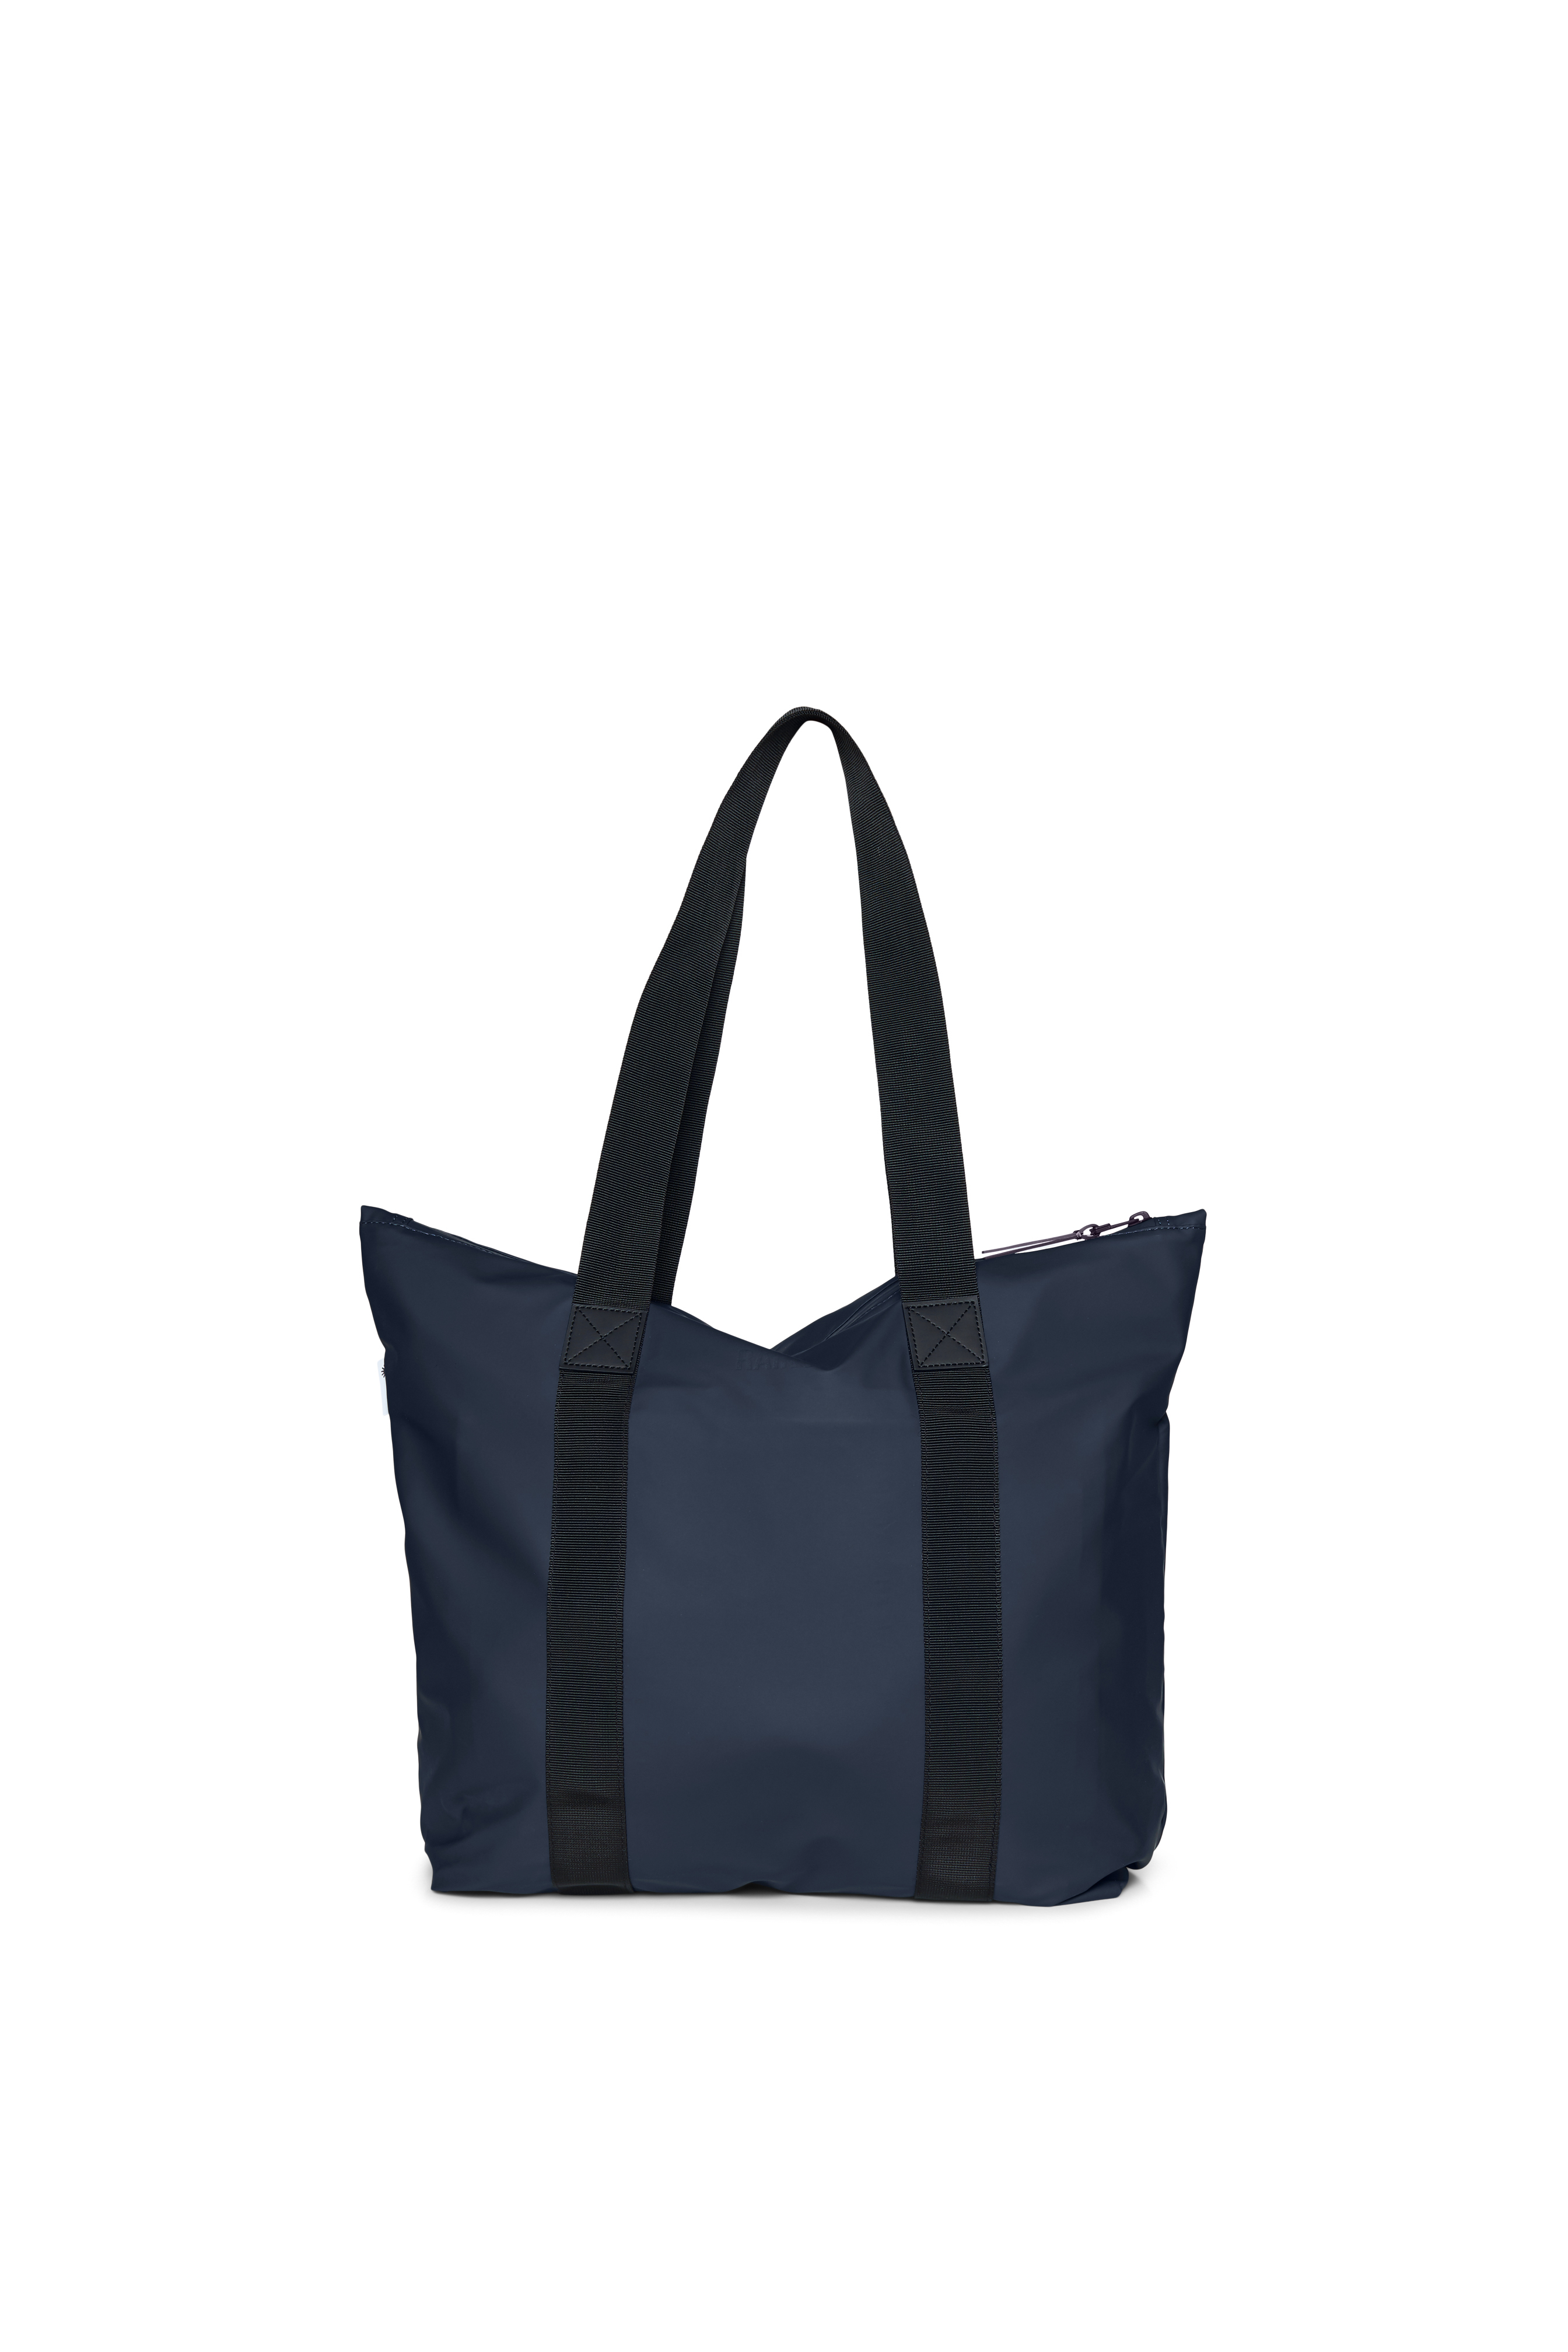 Rush Tote Bag, Navy, One Size